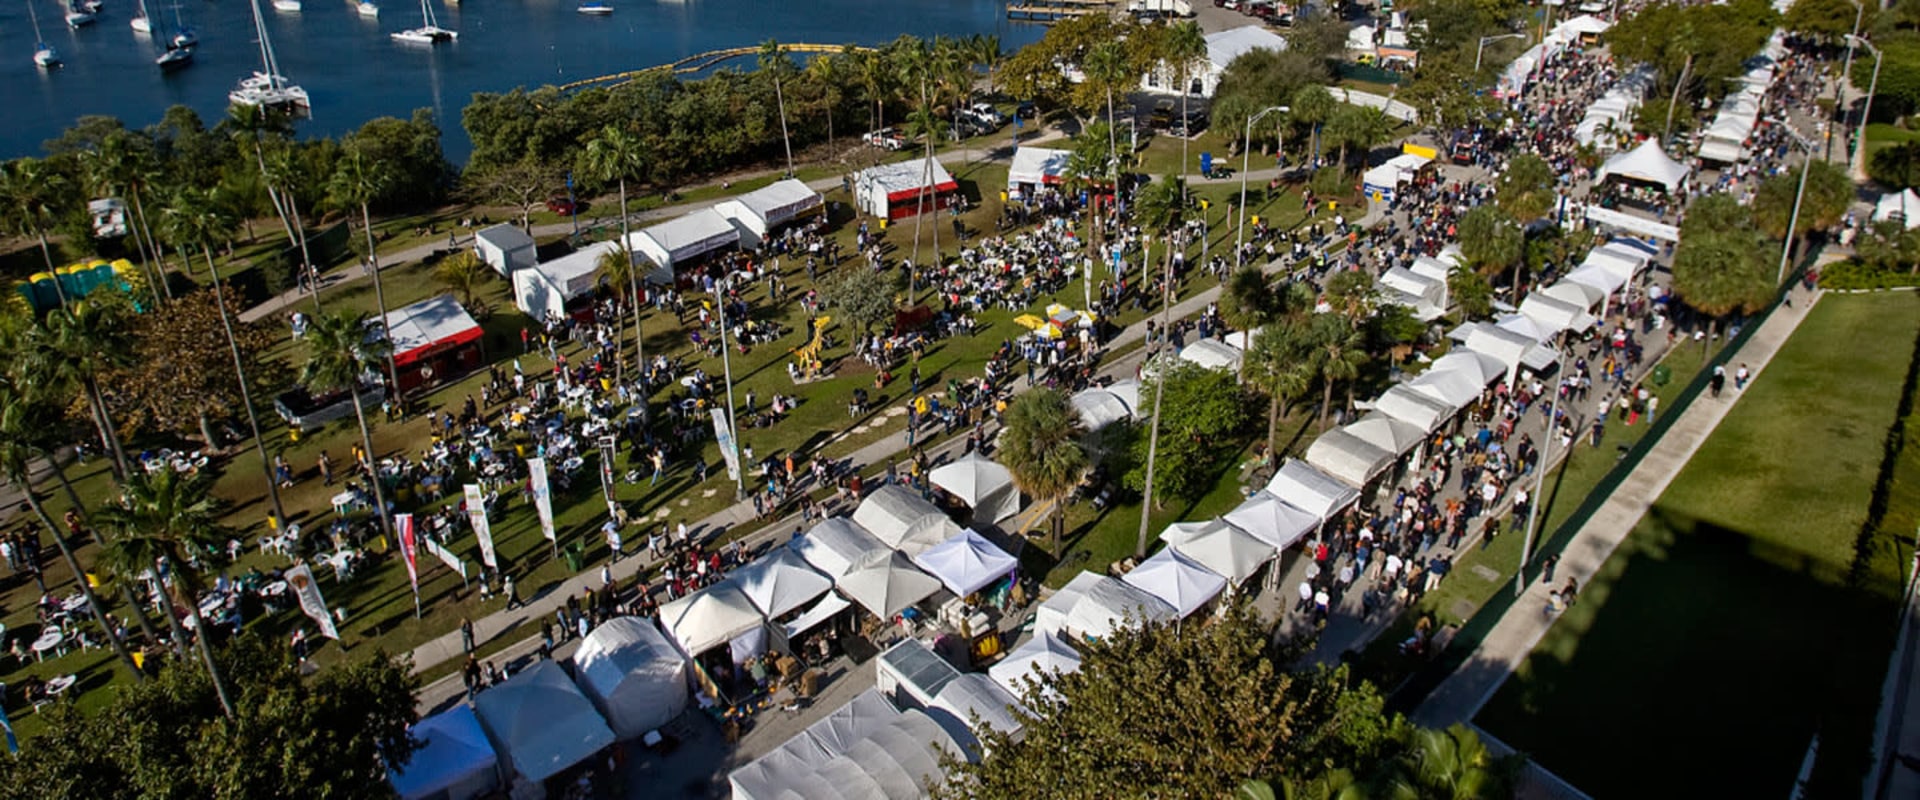 Is the Coconut Grove Art Festival Free? - A Comprehensive Guide